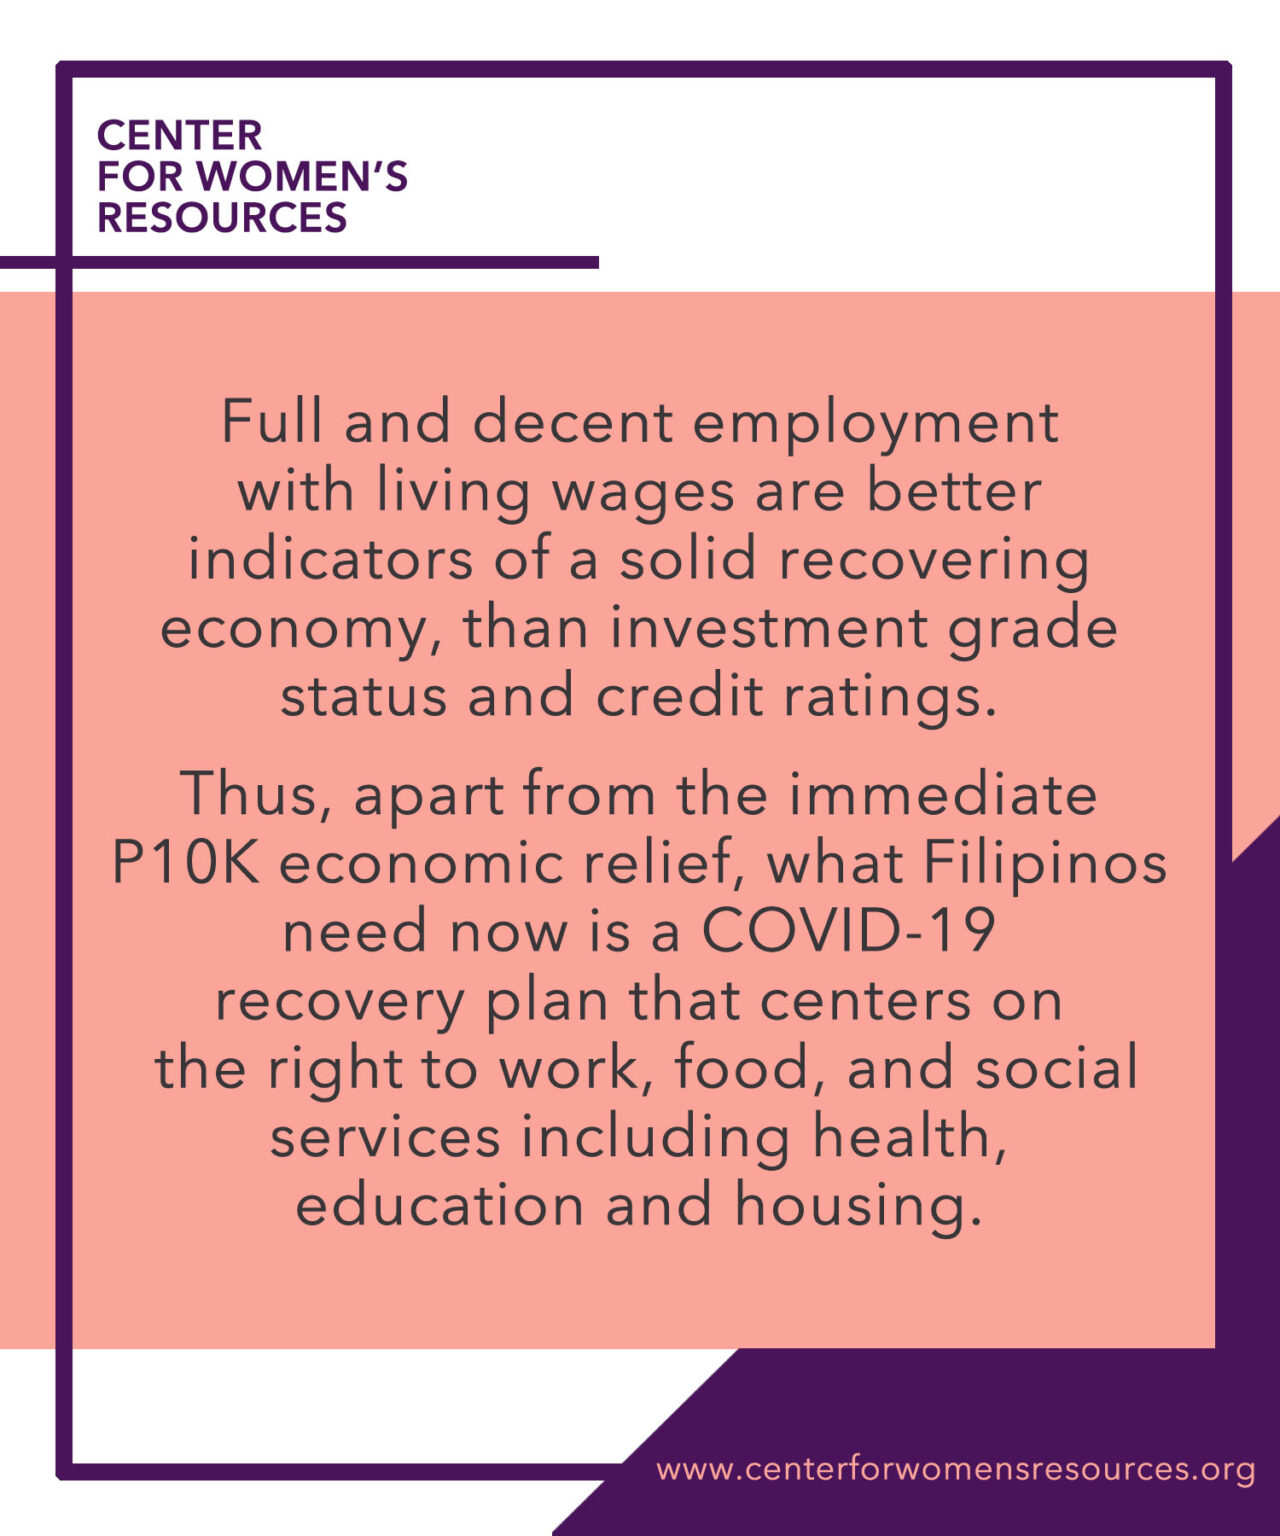 On economic relief amid COVID CWR Center for Women's Resources